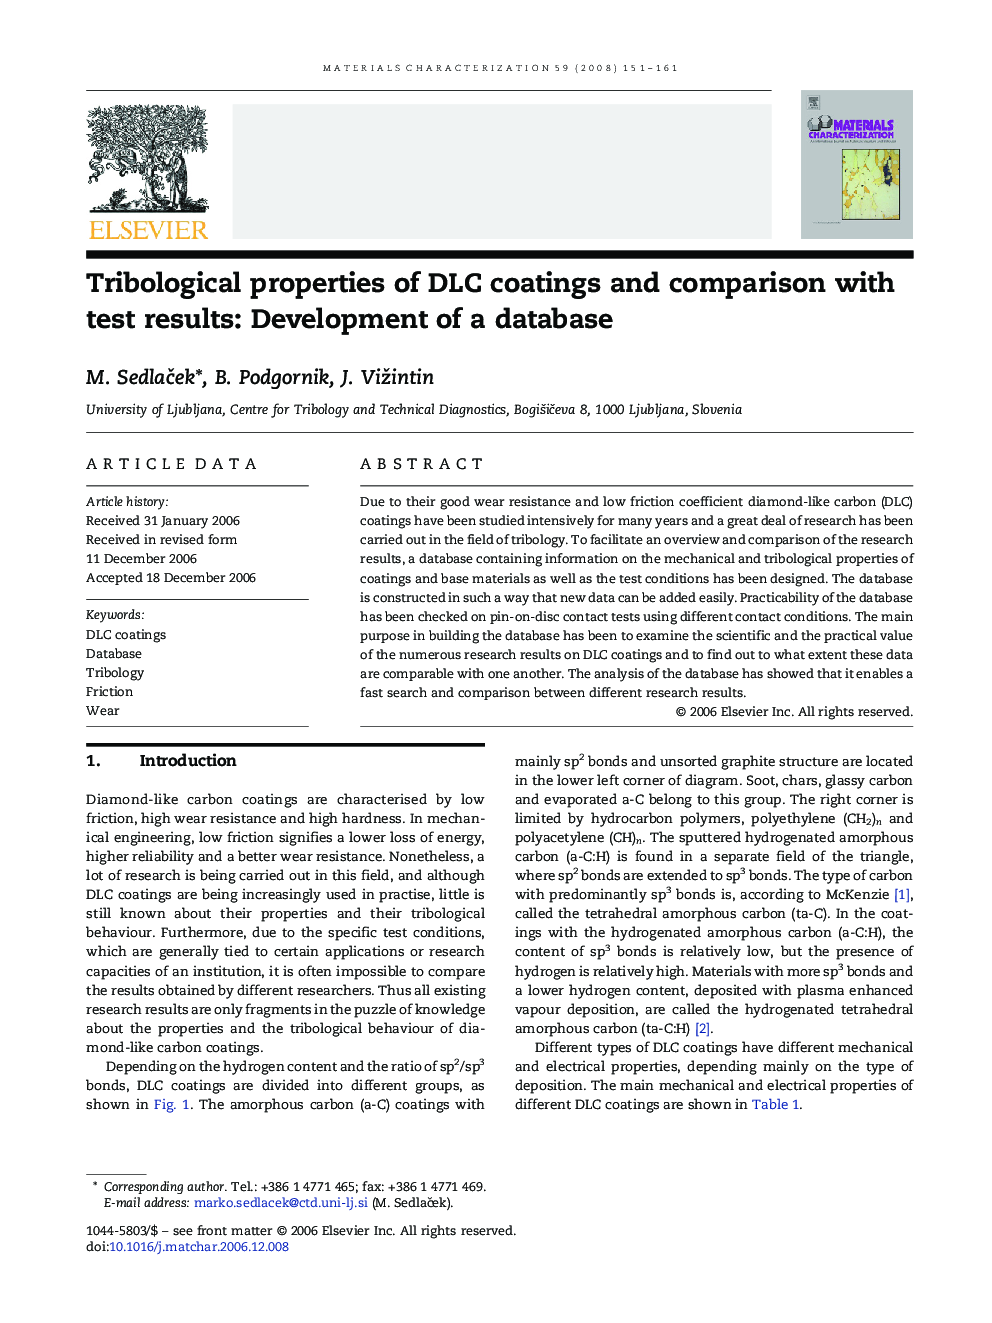 Tribological properties of DLC coatings and comparison with test results: Development of a database